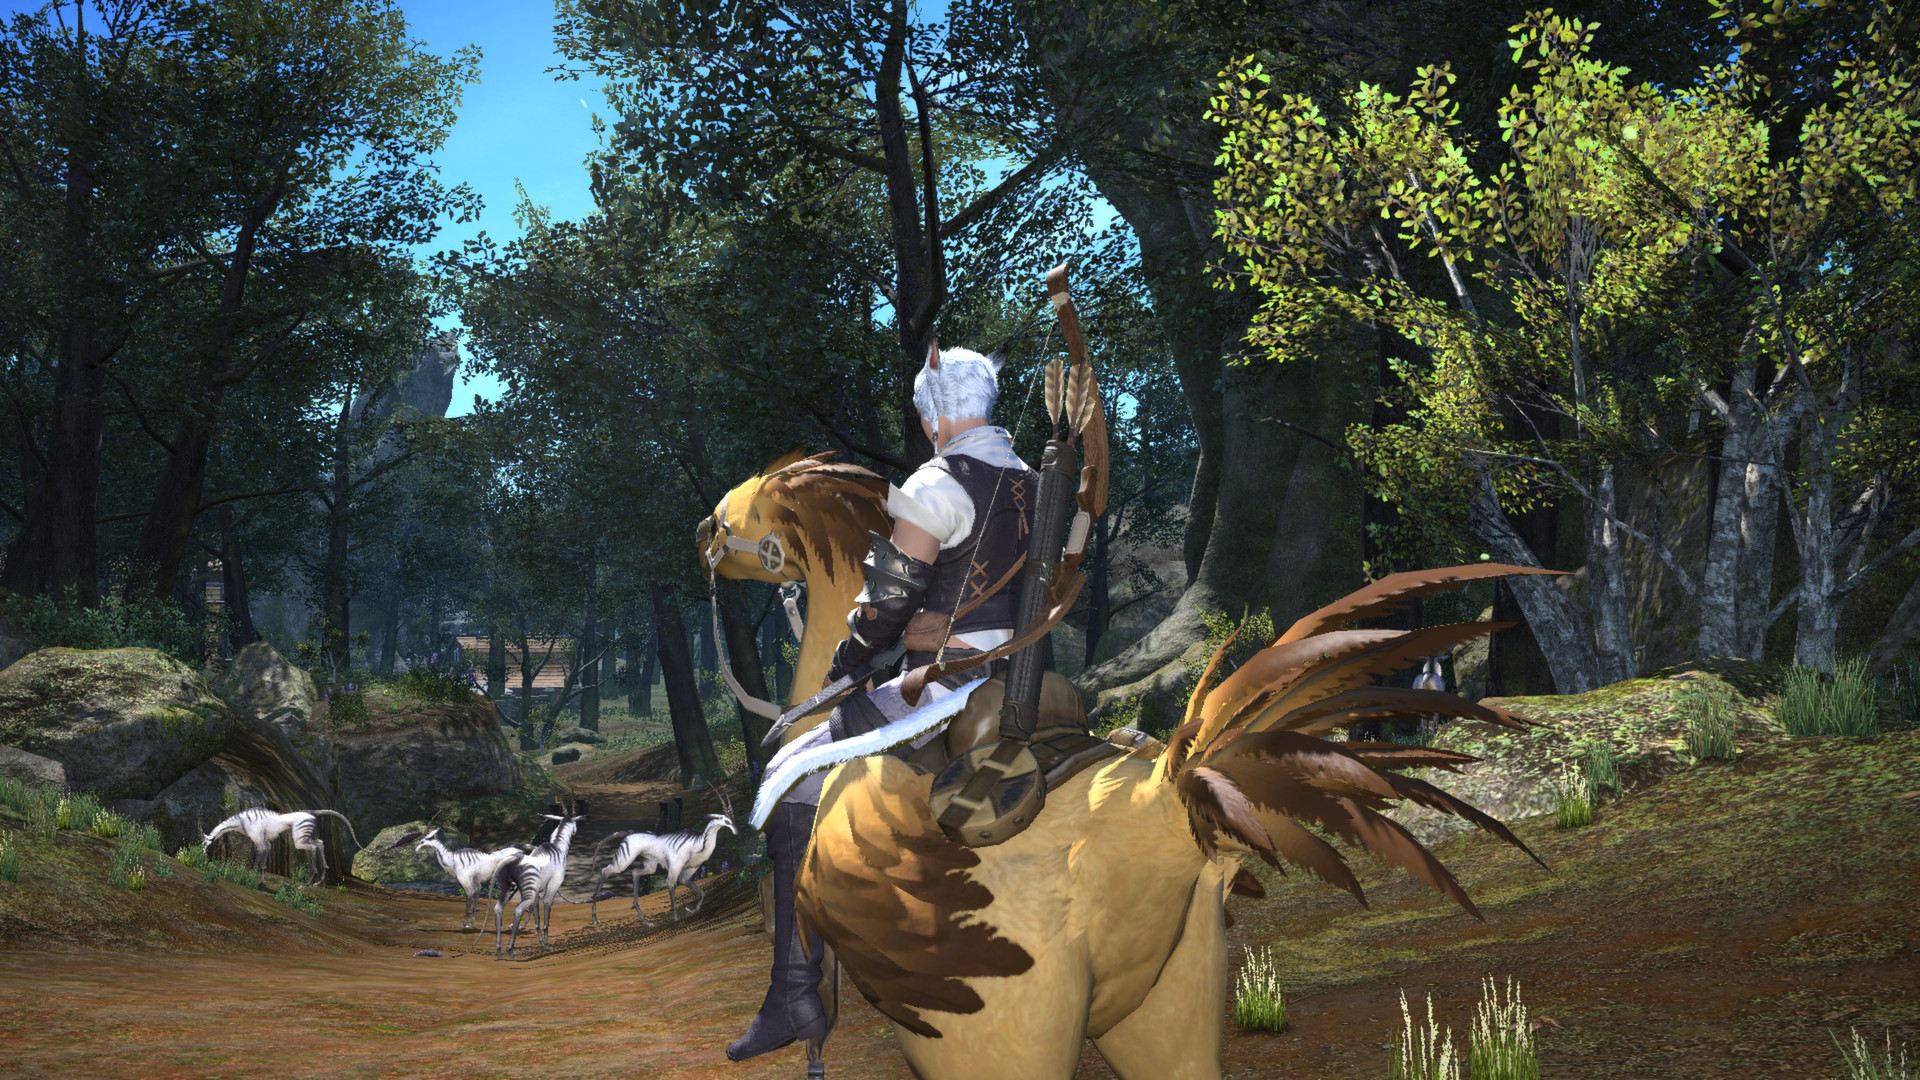 The best anime games: A Final Fantasy 14 character rides a beige, feathered mount in a dense forest, with small, monochrome creatures a short distance away